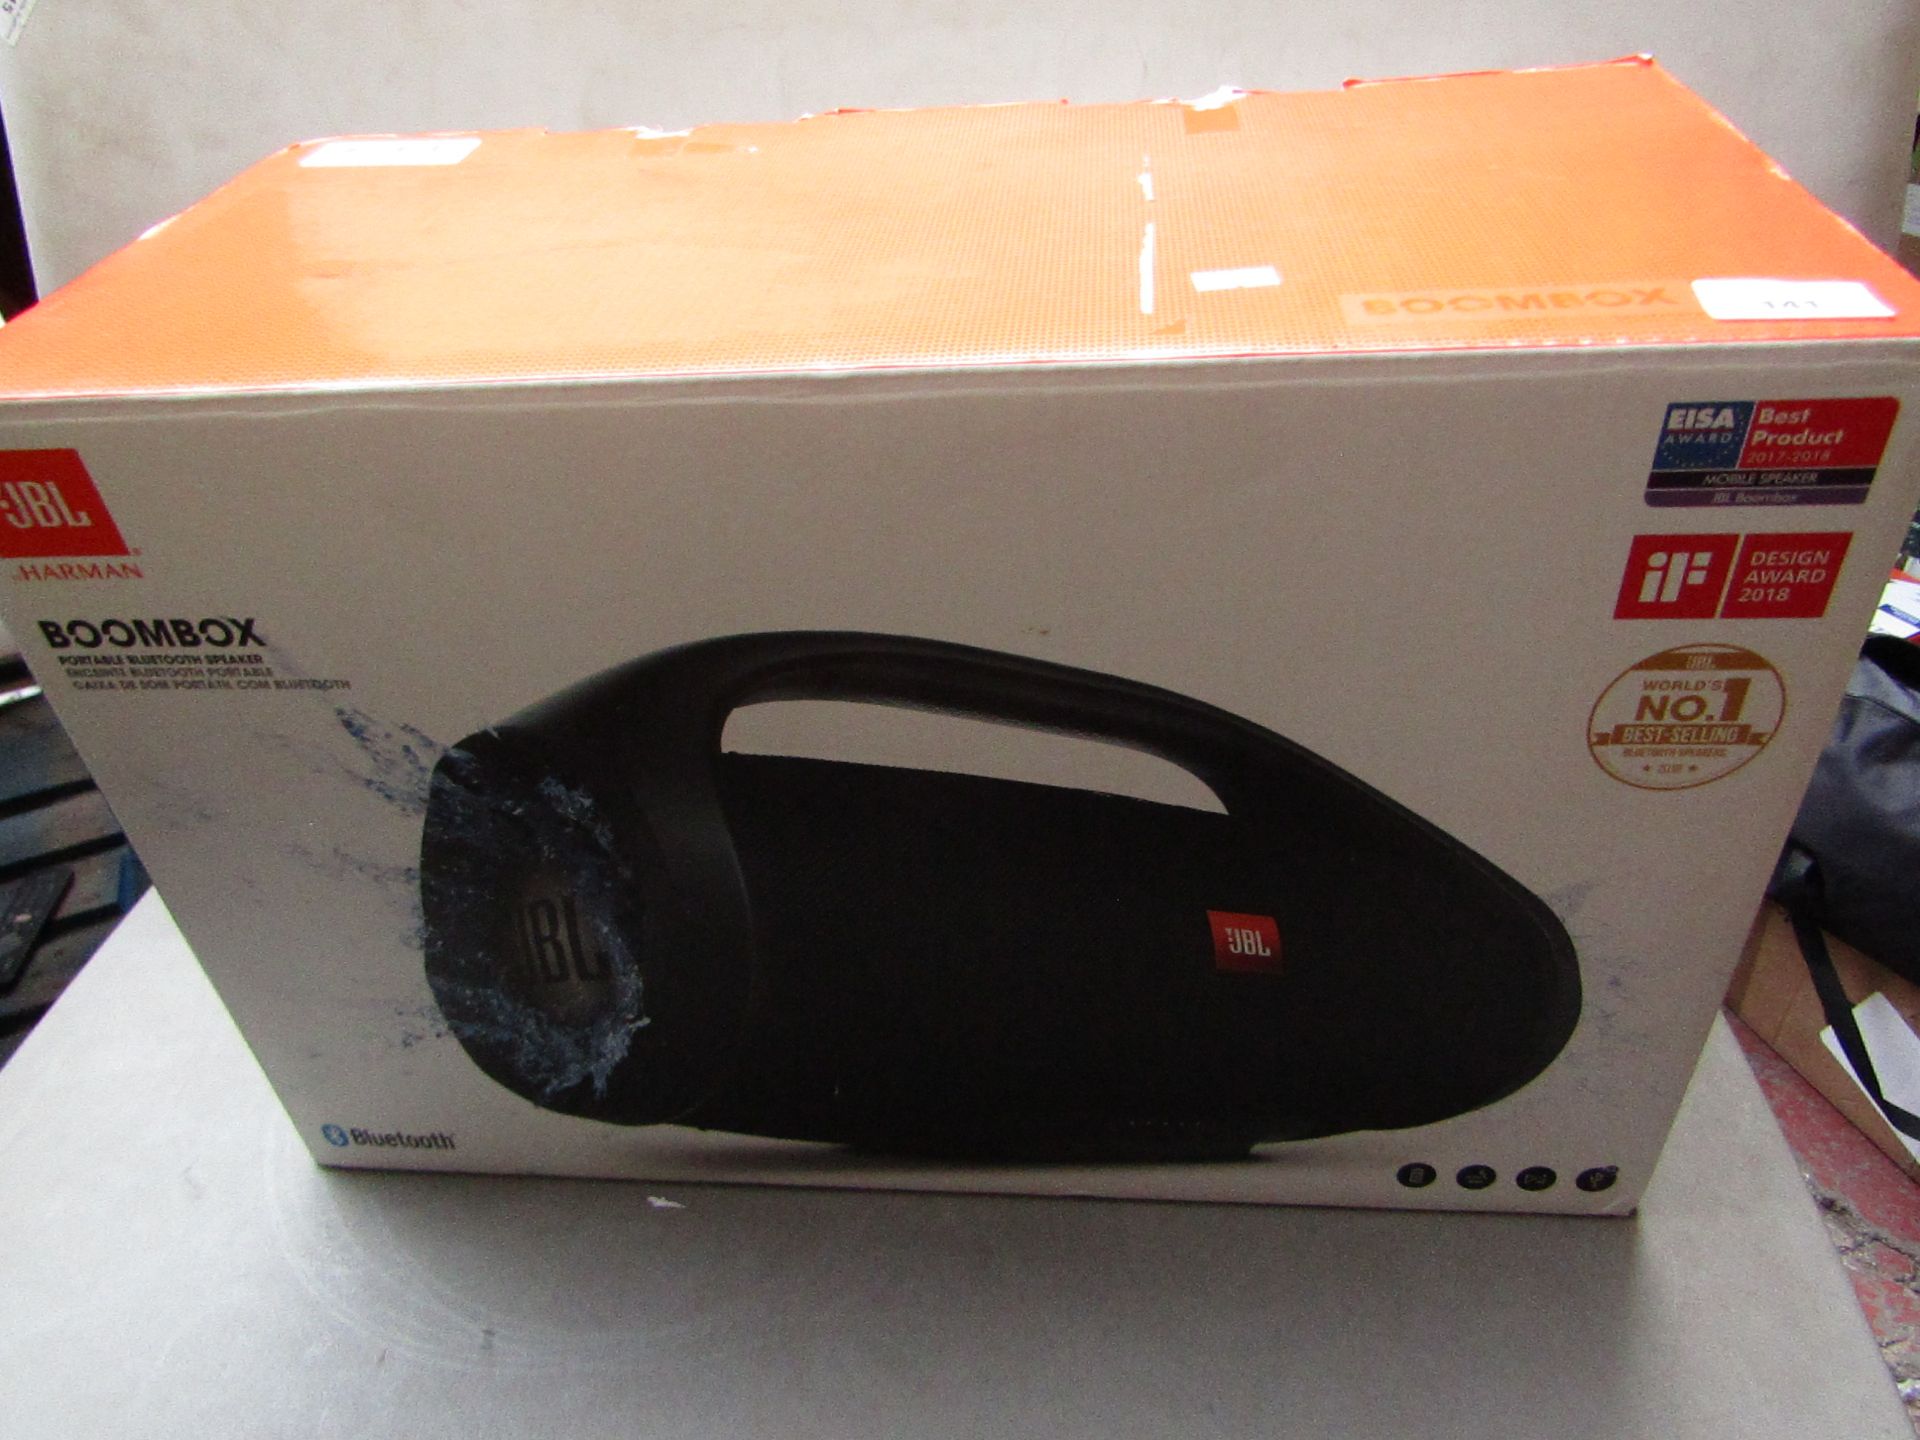 JBL Boombox portable Bluetooth speaker, unchecked and boxed. RRP £249